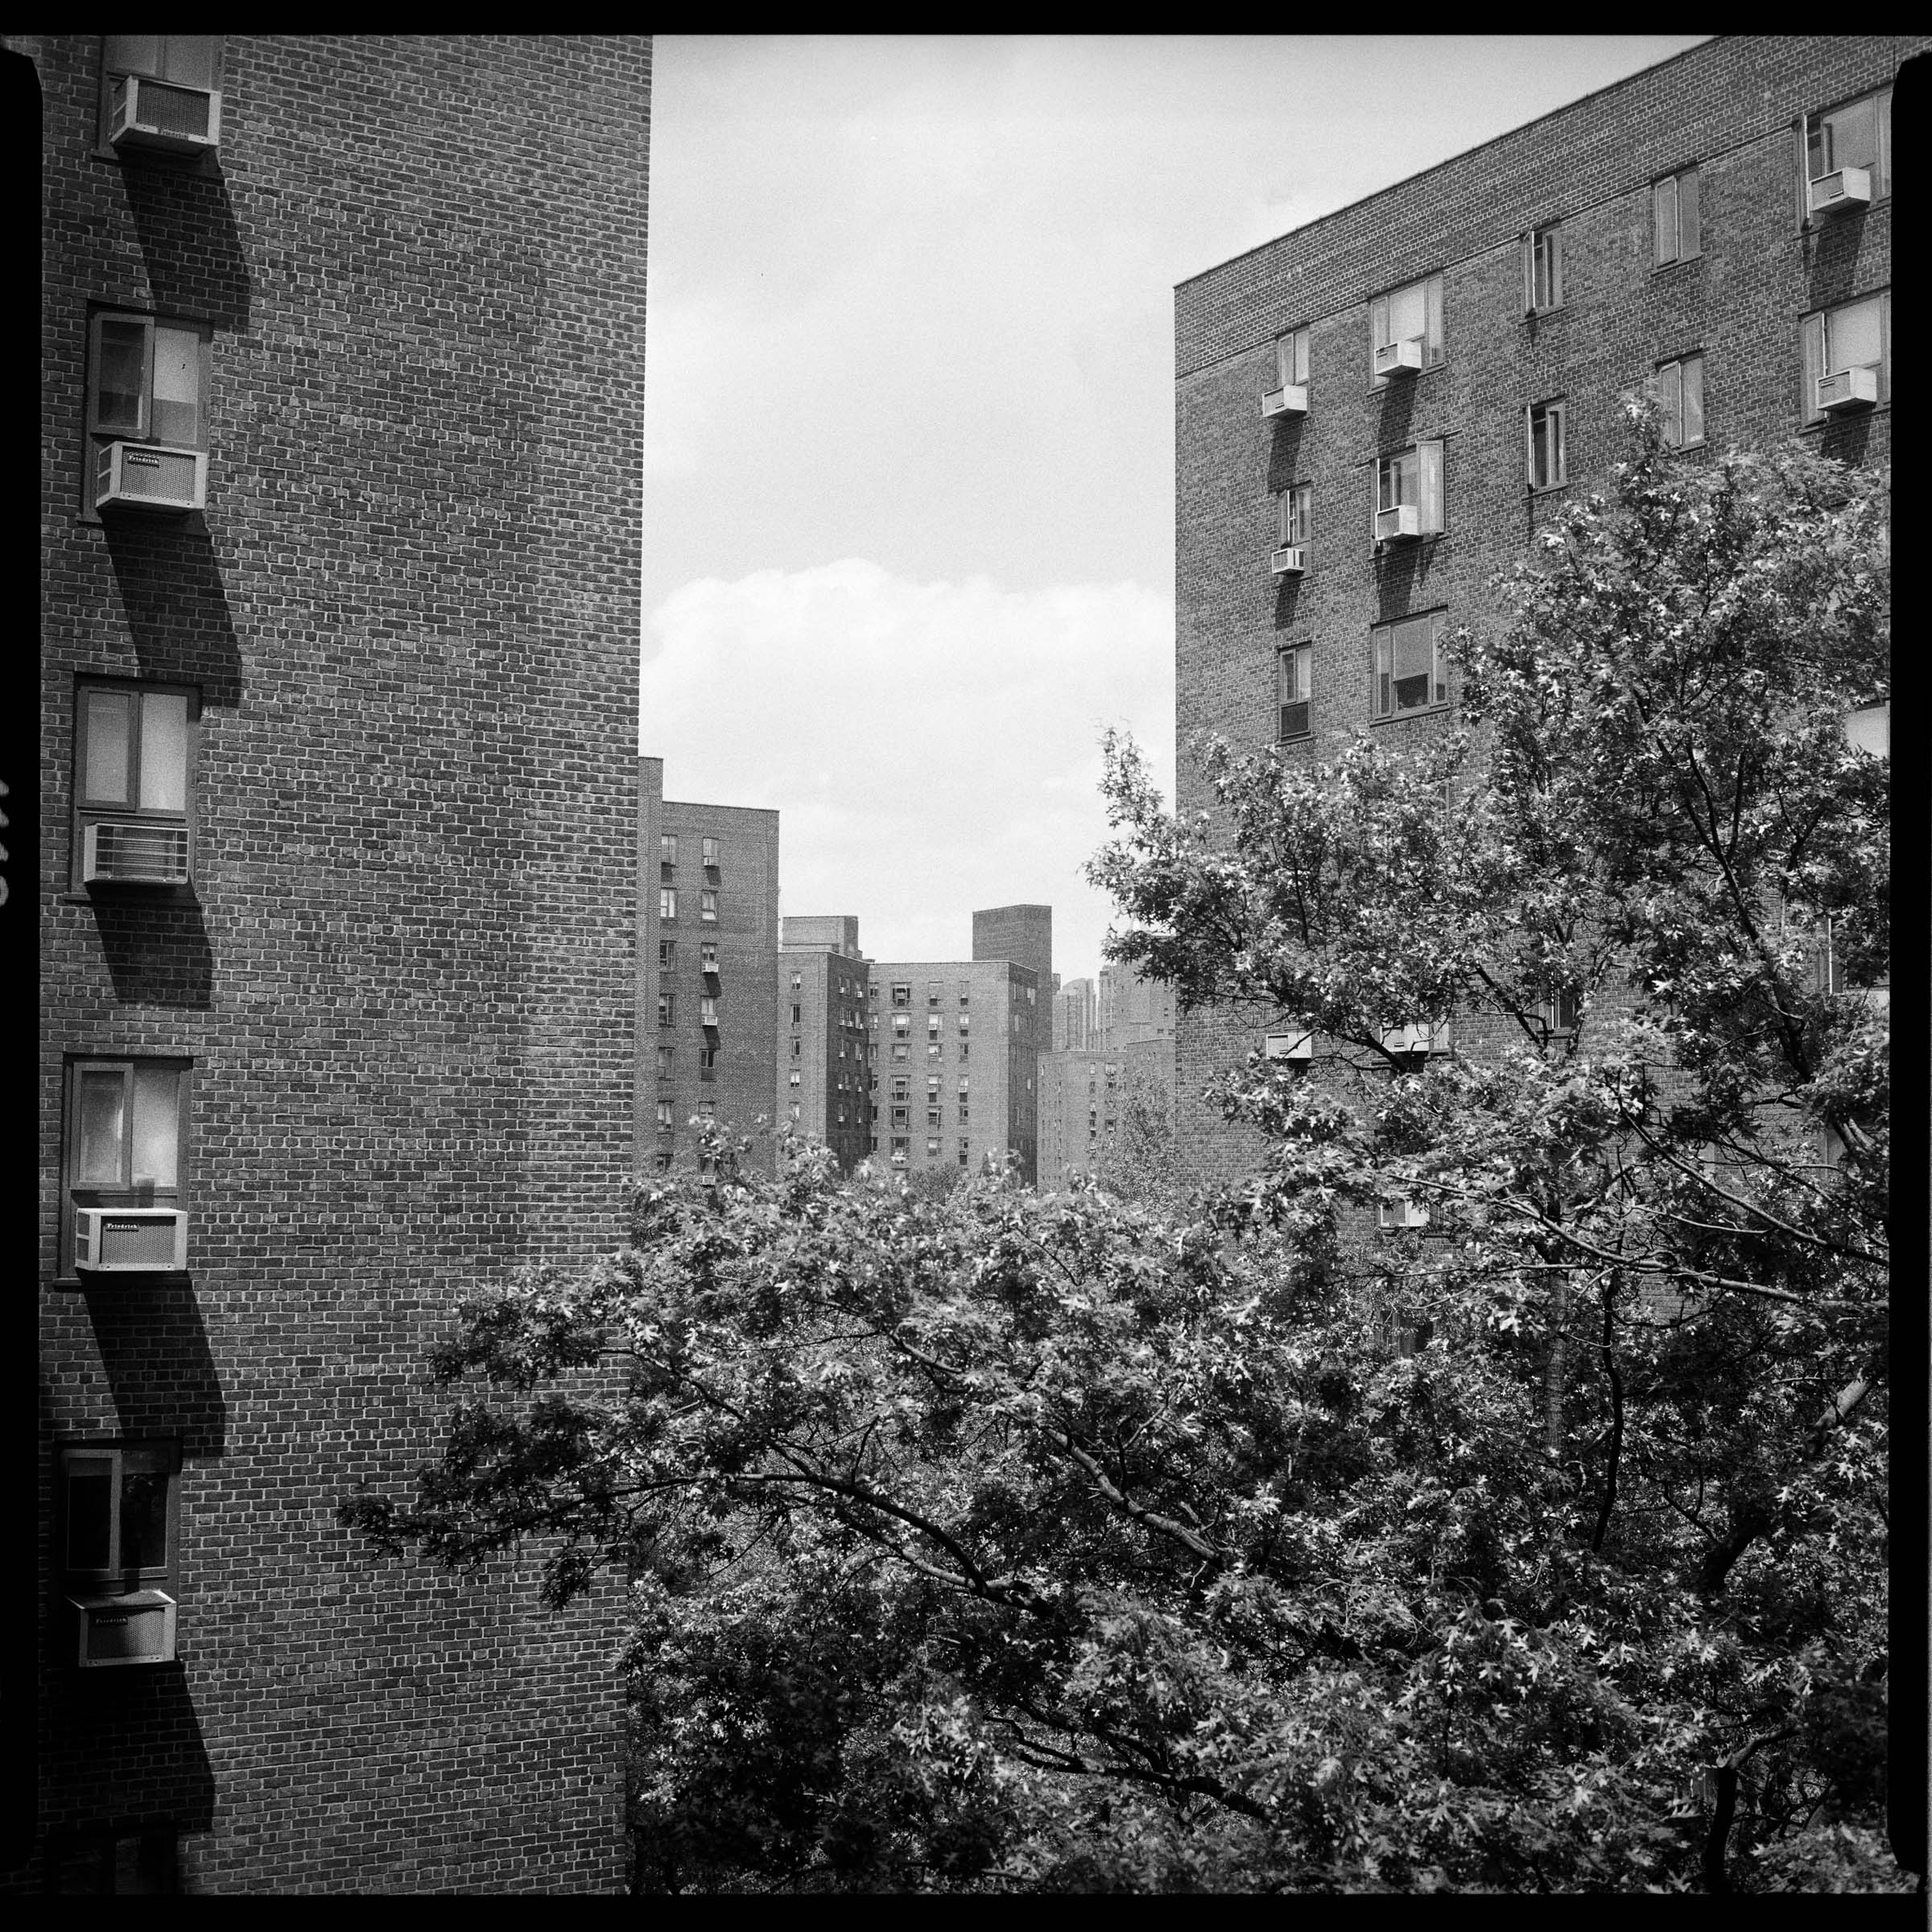 Black and white square photo of a tree in an urban apartment complex courtyard. This is Stuyvesant Town where I lived until last year.